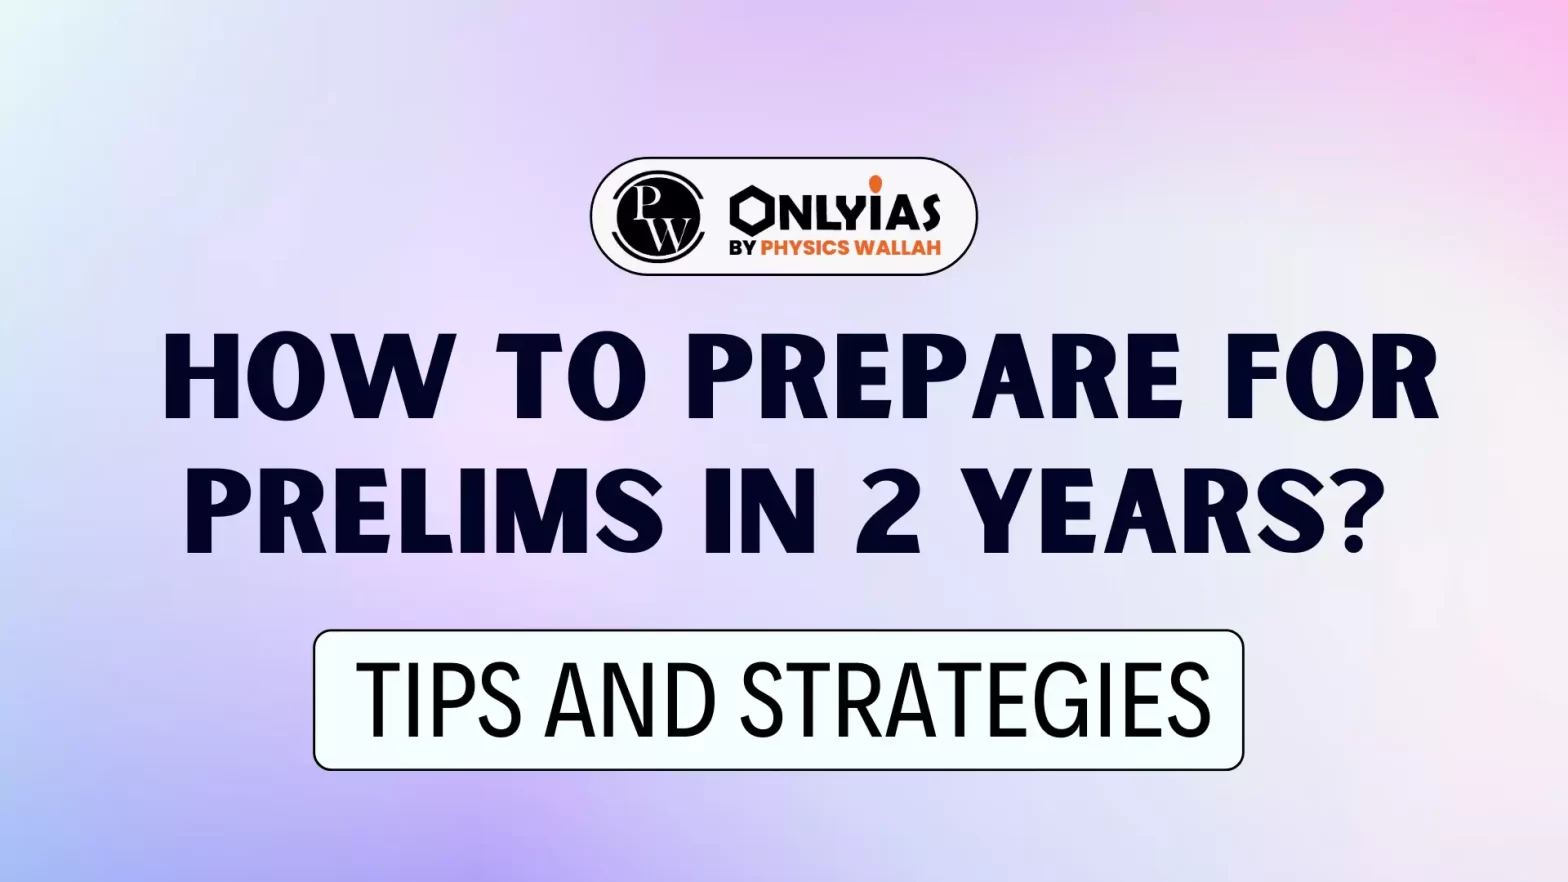 How to Prepare for Prelims In 2 Years?: Tips and Strategies